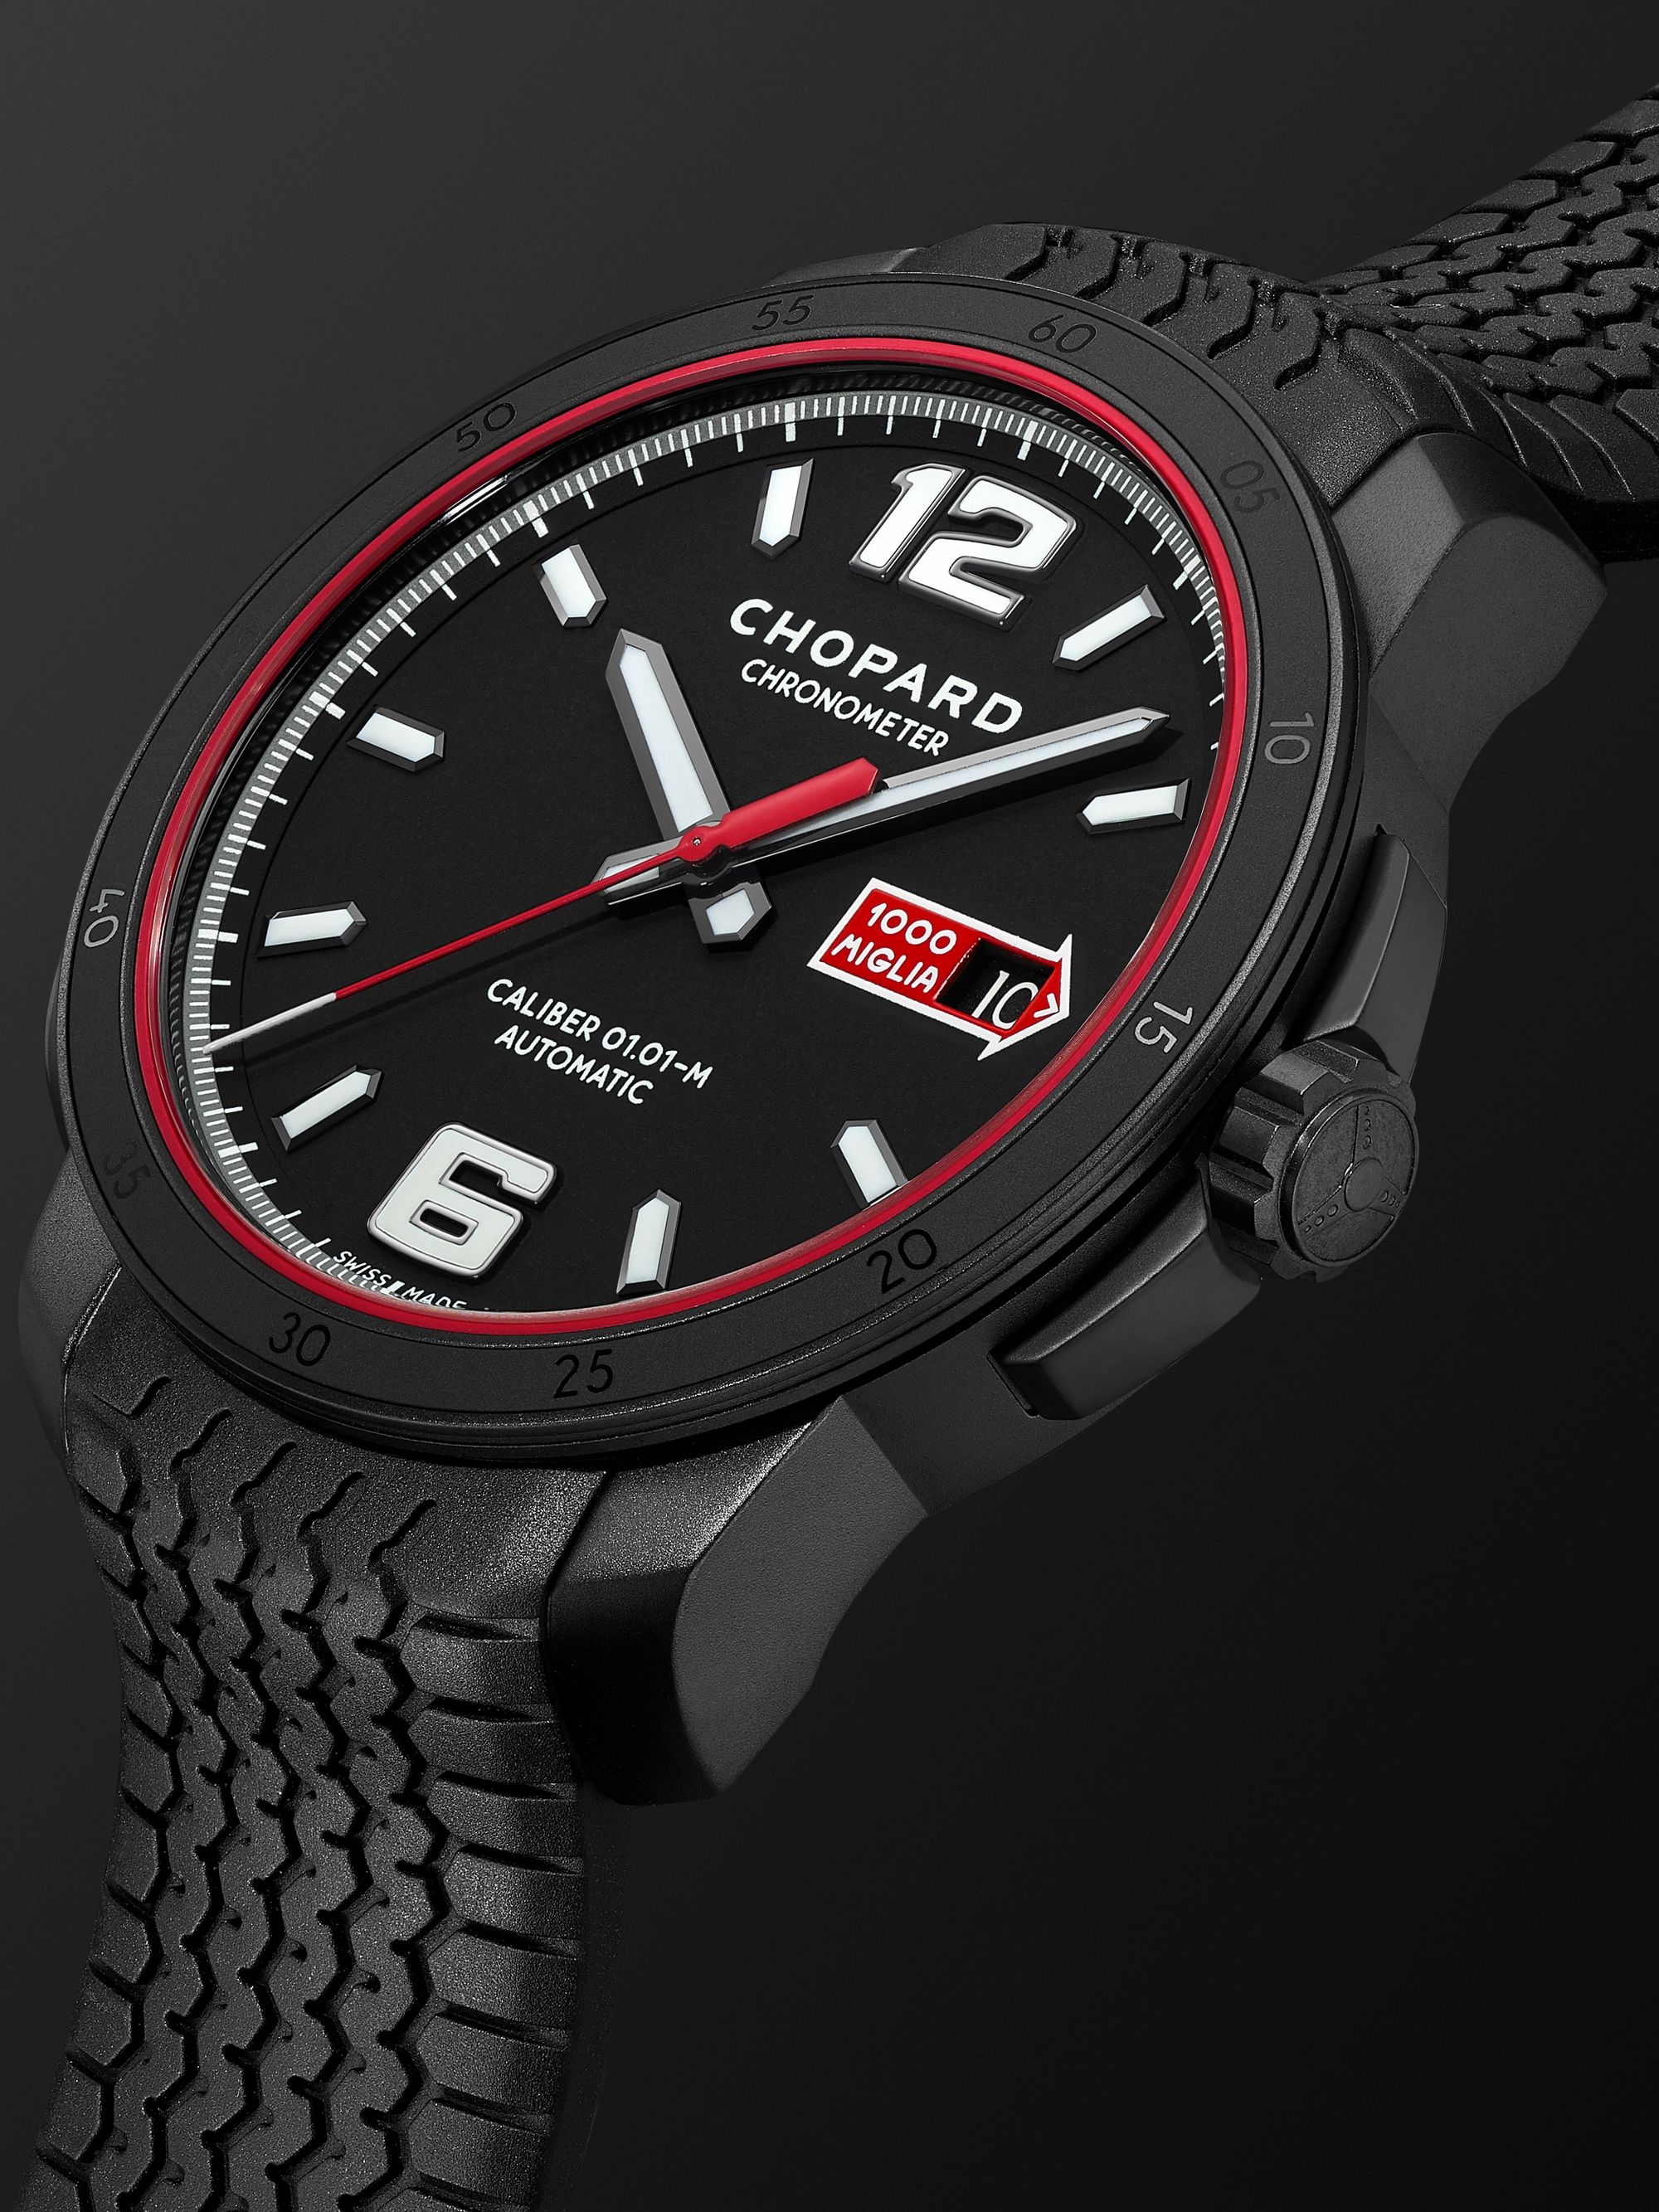 CHOPARD Mille Miglia GTS Speedblack Automatic Speed Limited Edition 43mm DLC-Coated Stainless Steel and Rubber Watch, Ref. No.